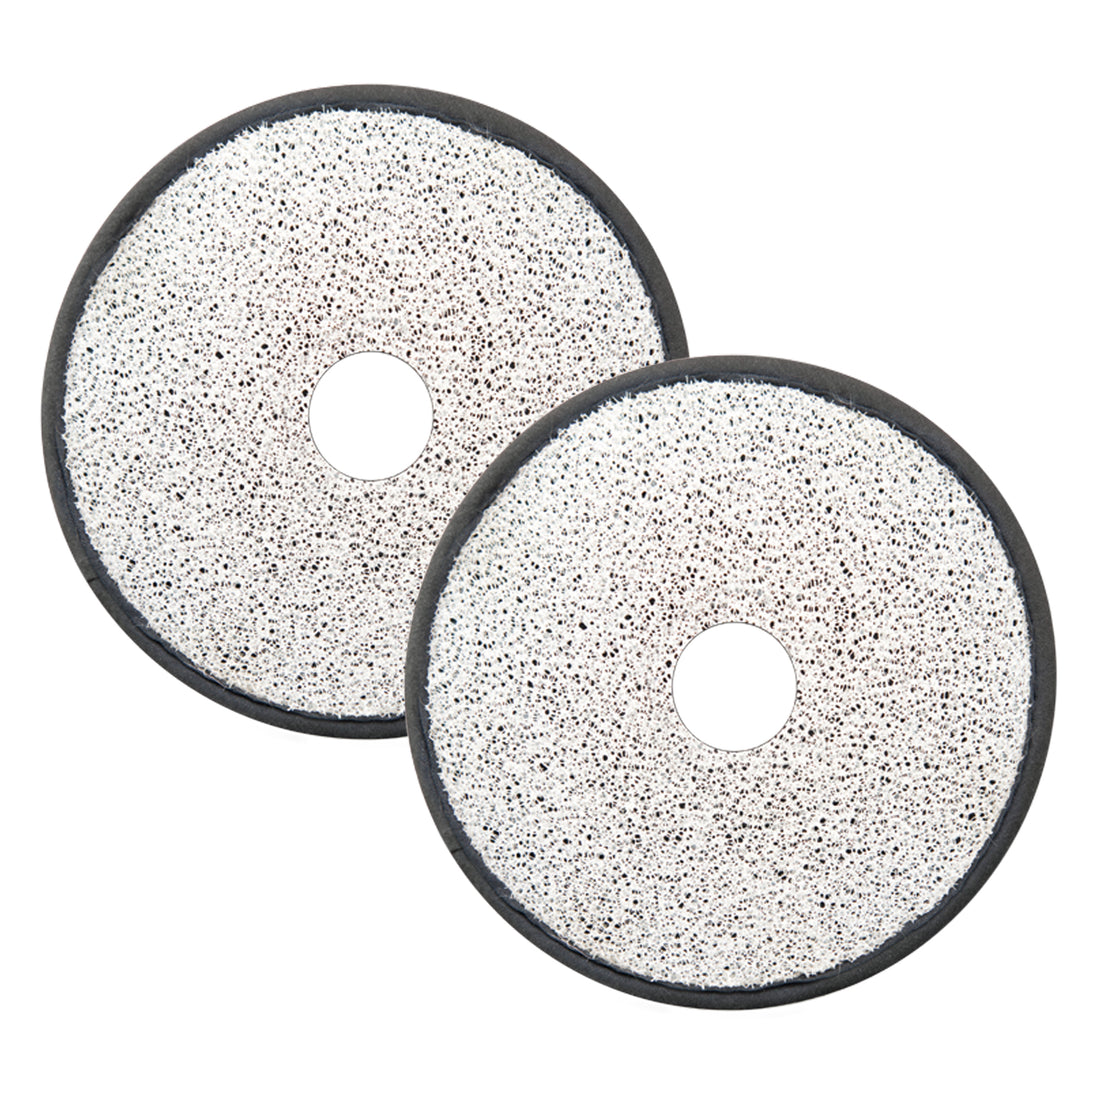 【CATIT】Dual Action Replacement Filters - 2 pk